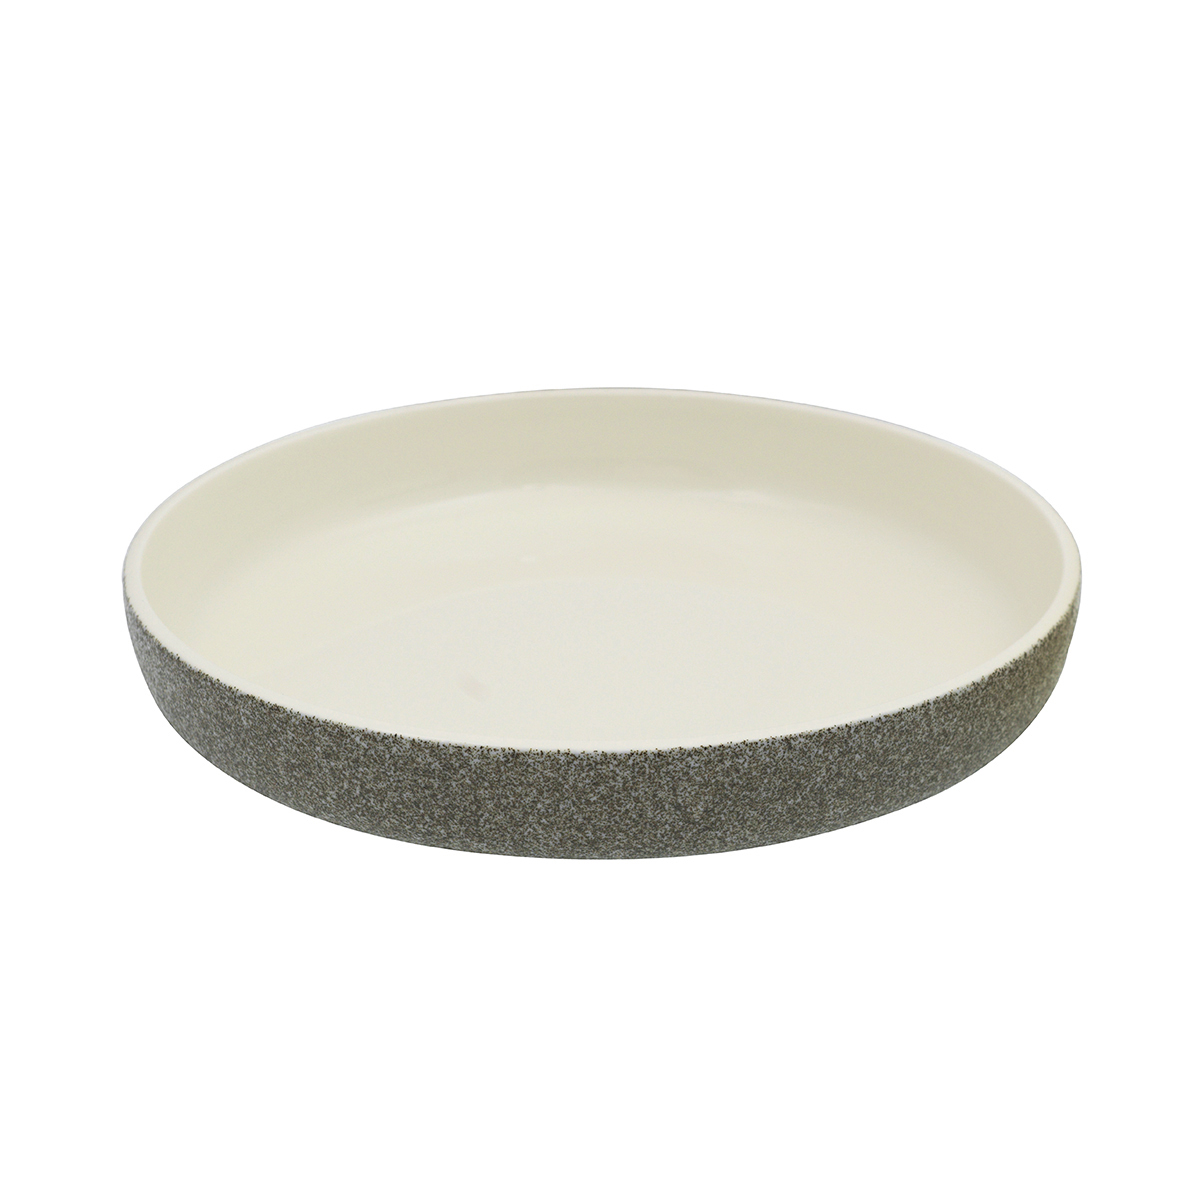 EASE DUAL ROUND DEEP PLATES